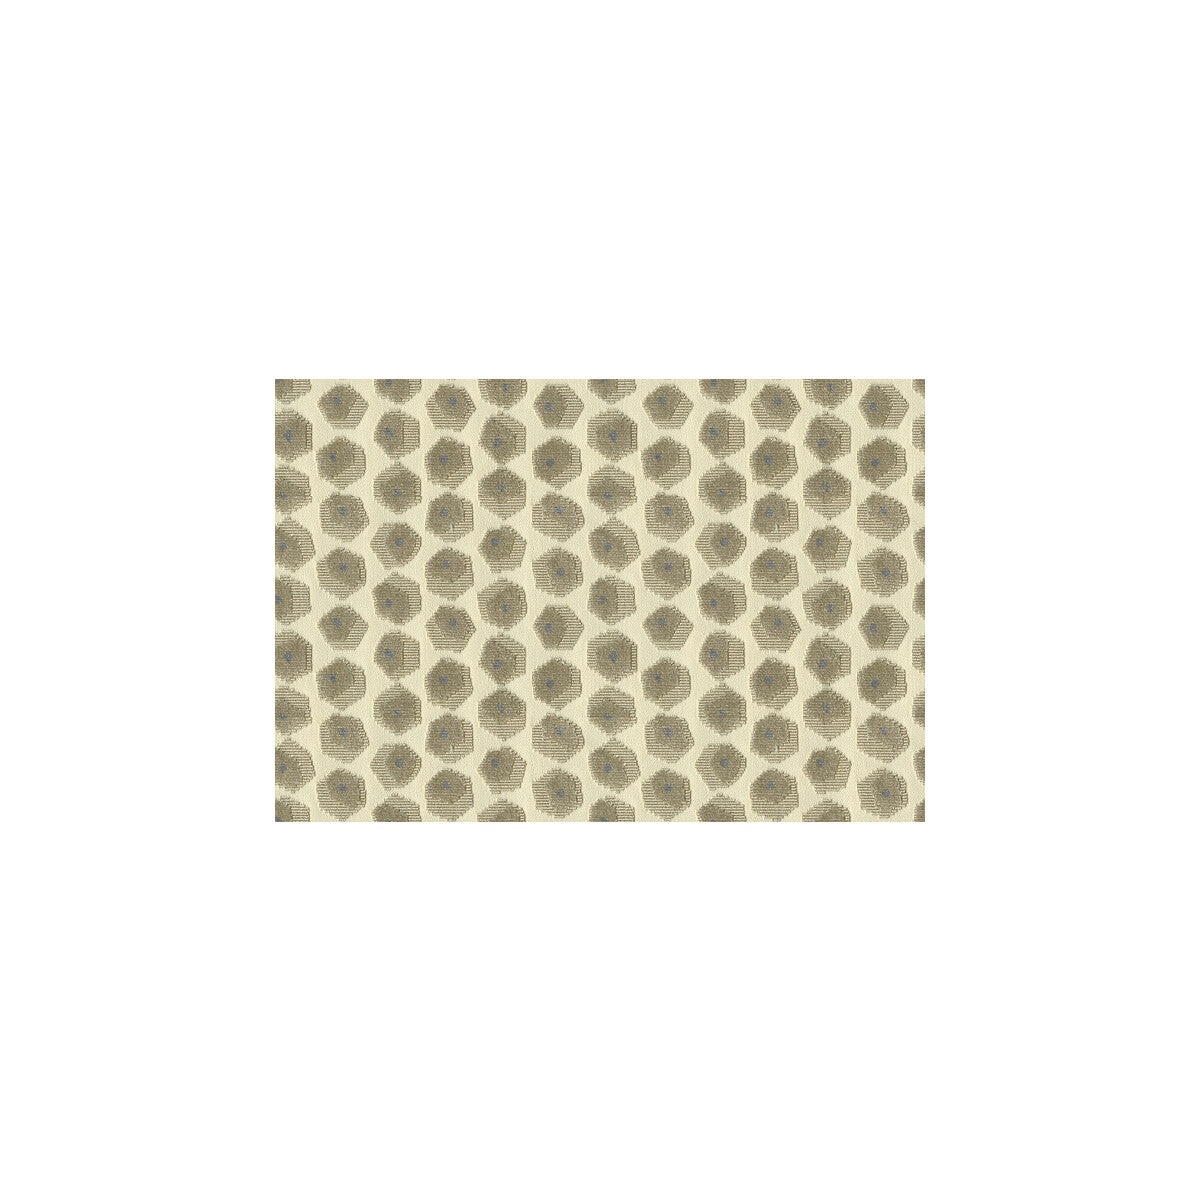 Gem Velvet fabric in beige color - pattern GWF-3036.16.0 - by Lee Jofa Modern in the Ventana Weaves collection